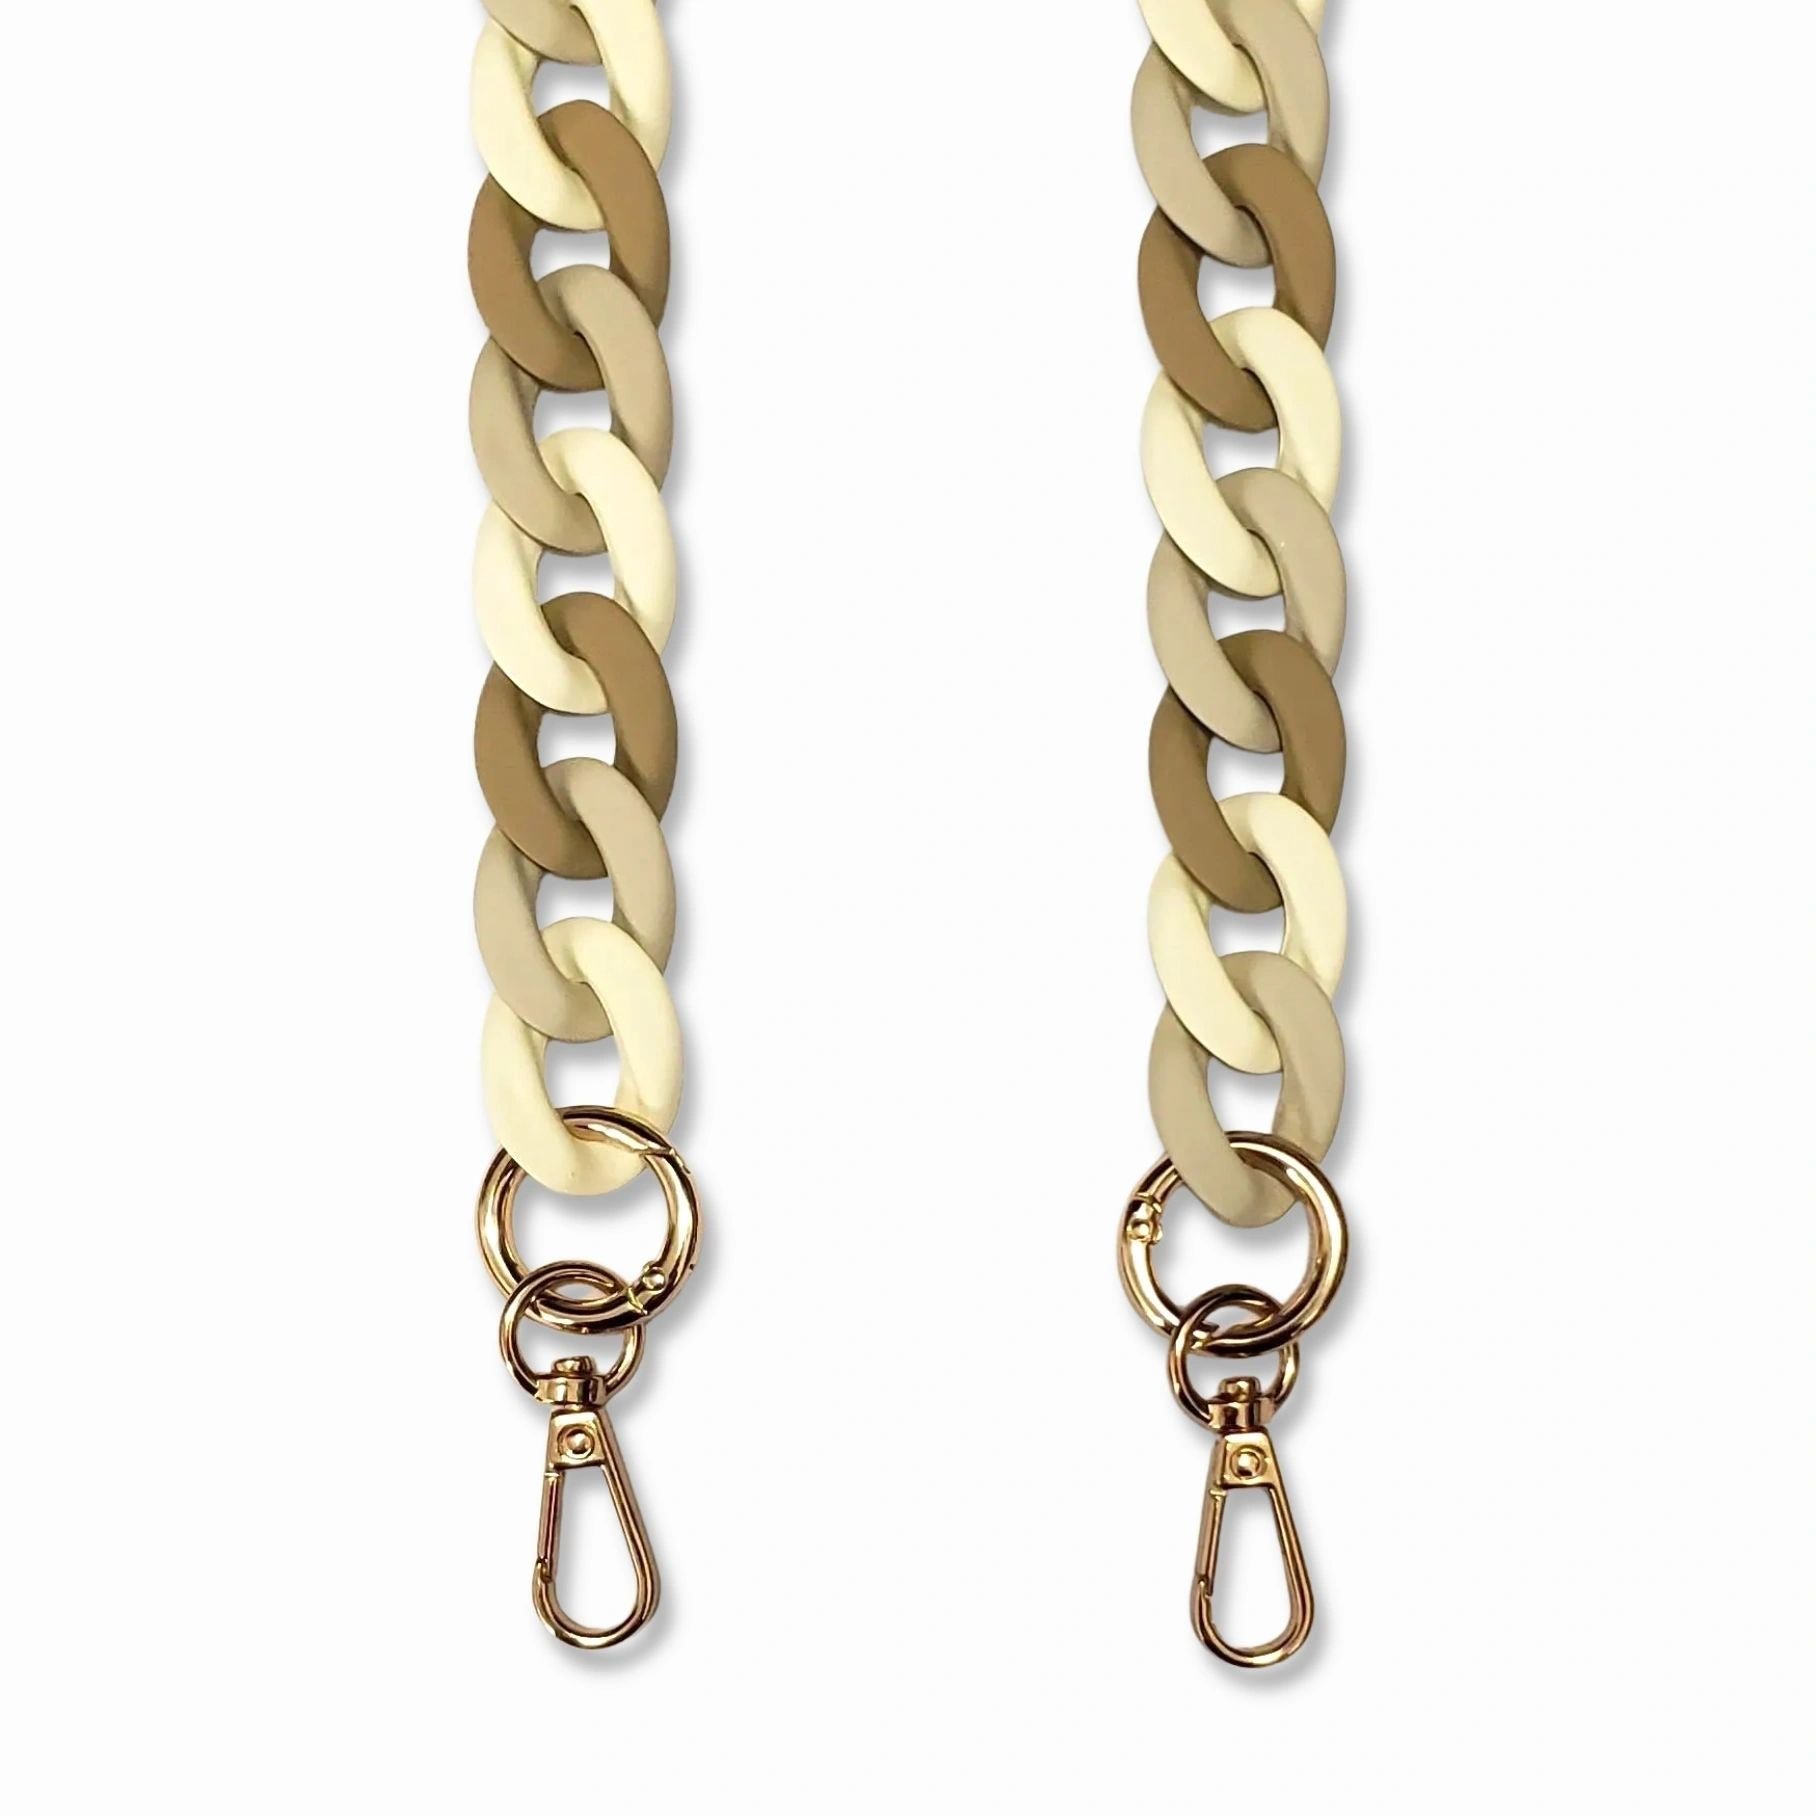 taupe off-white mix color Matte Resin Phone Chain with Golden Carabiners